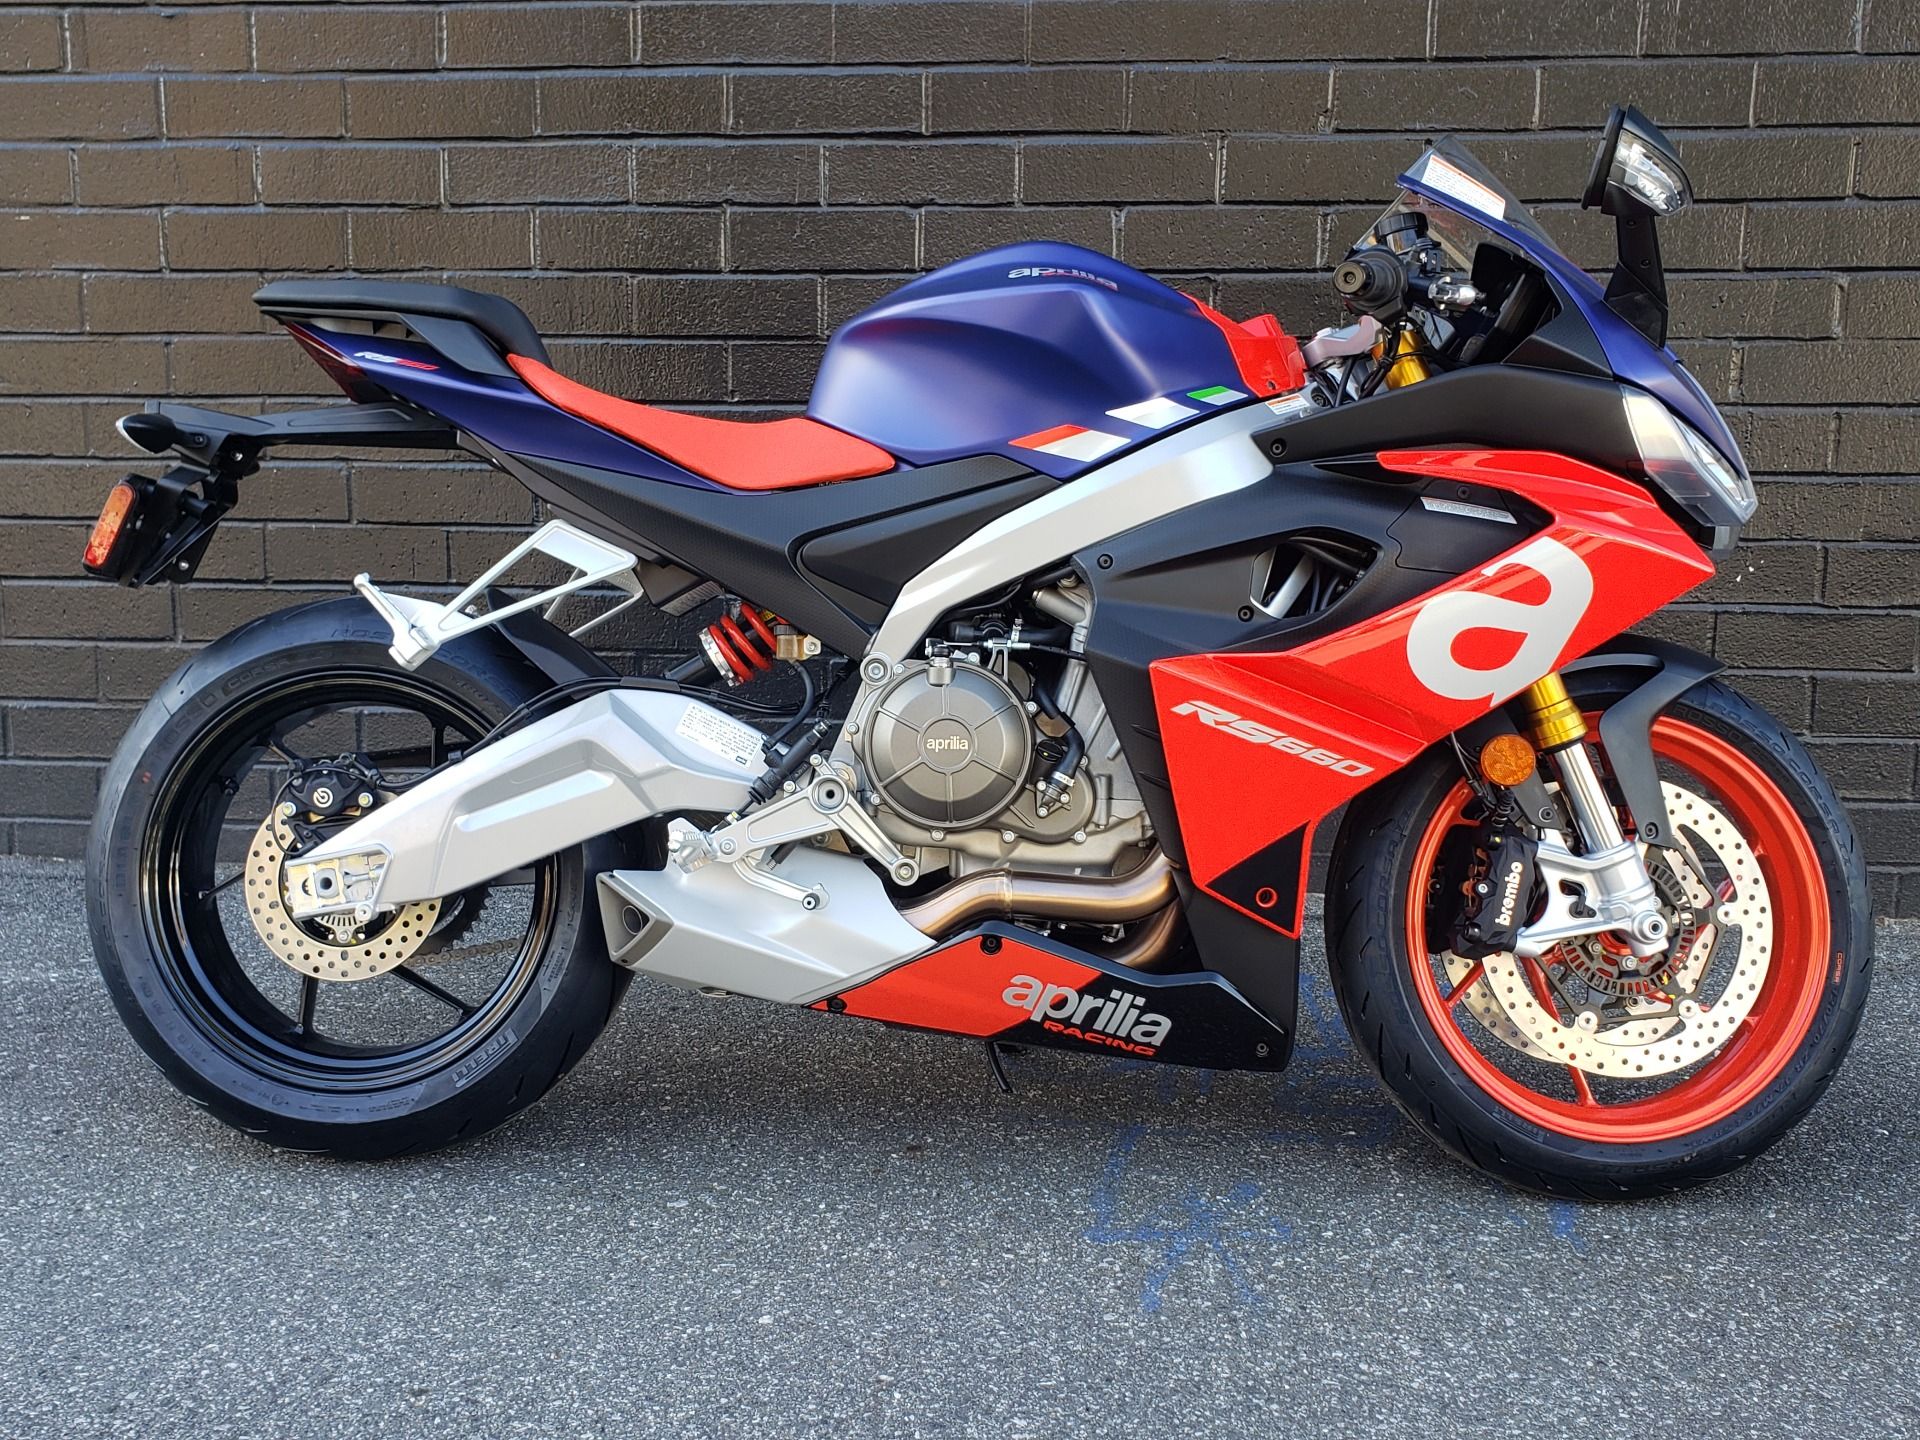 New 2021 Aprilia RS 660 Motorcycles in San Jose, CA. Stock Number: AA0072